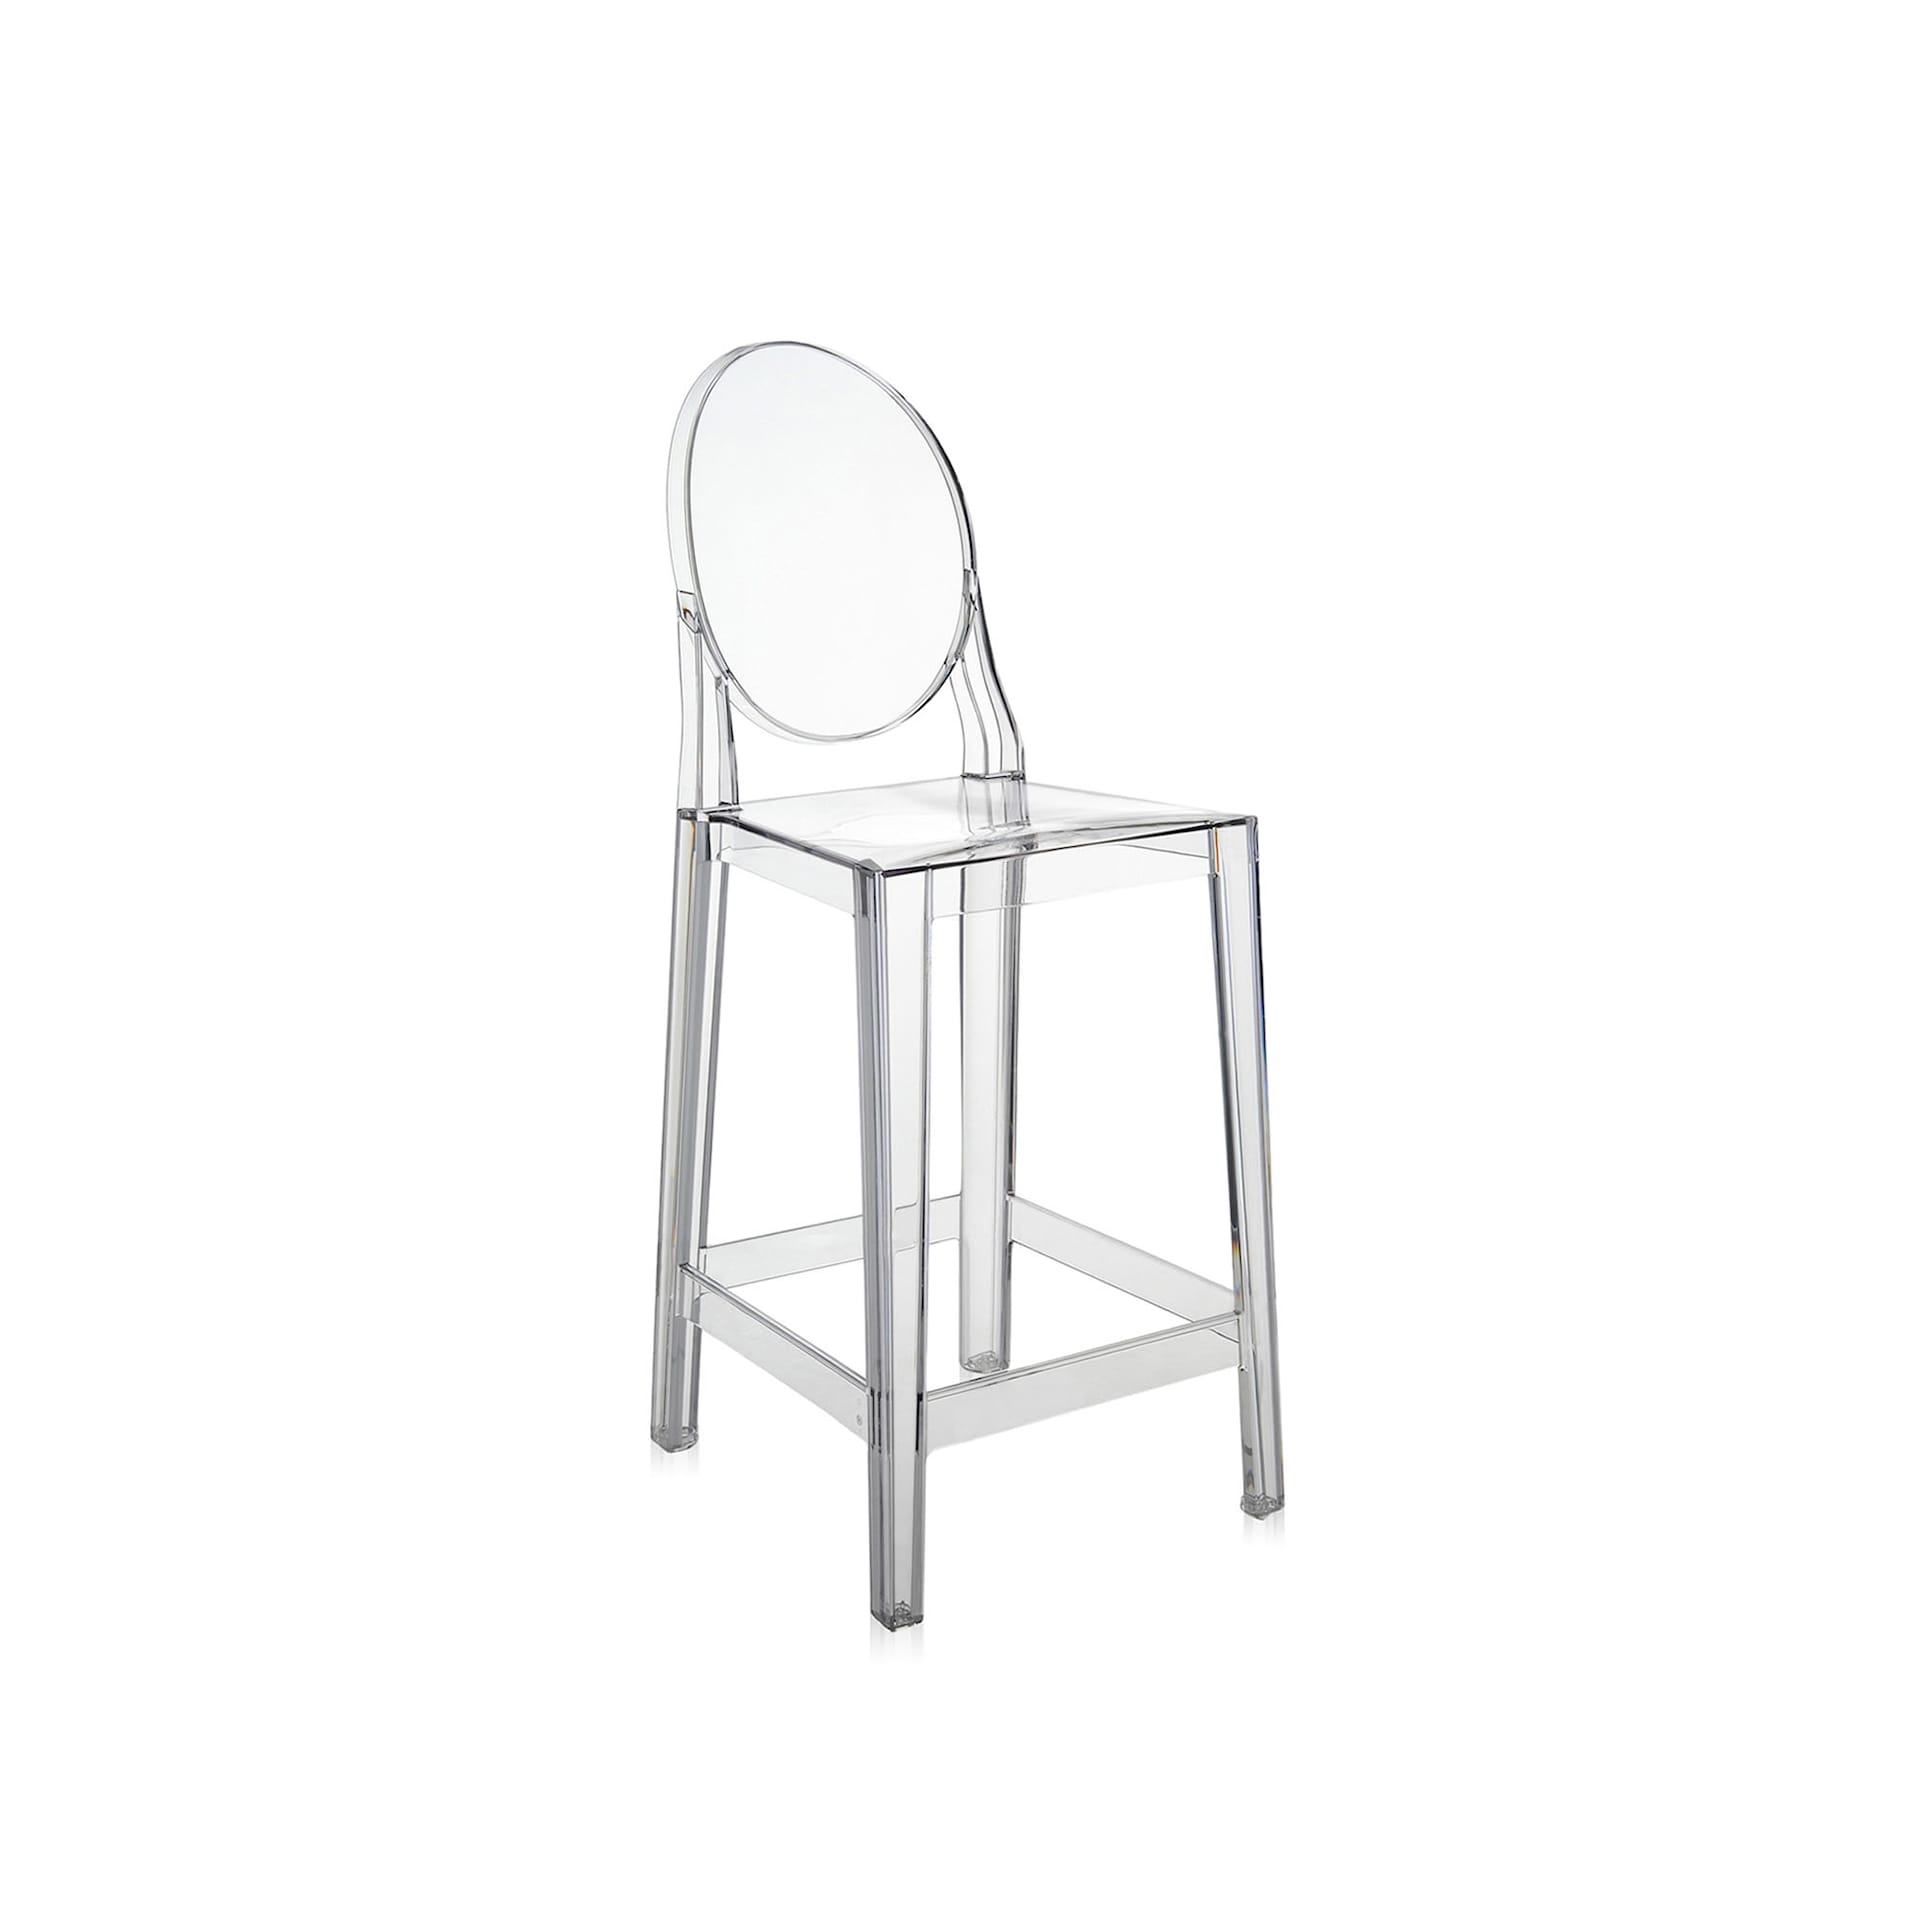 One More Stool Oval Back Rest H.65 cm - Kartell - Philippe Starck - NO GA